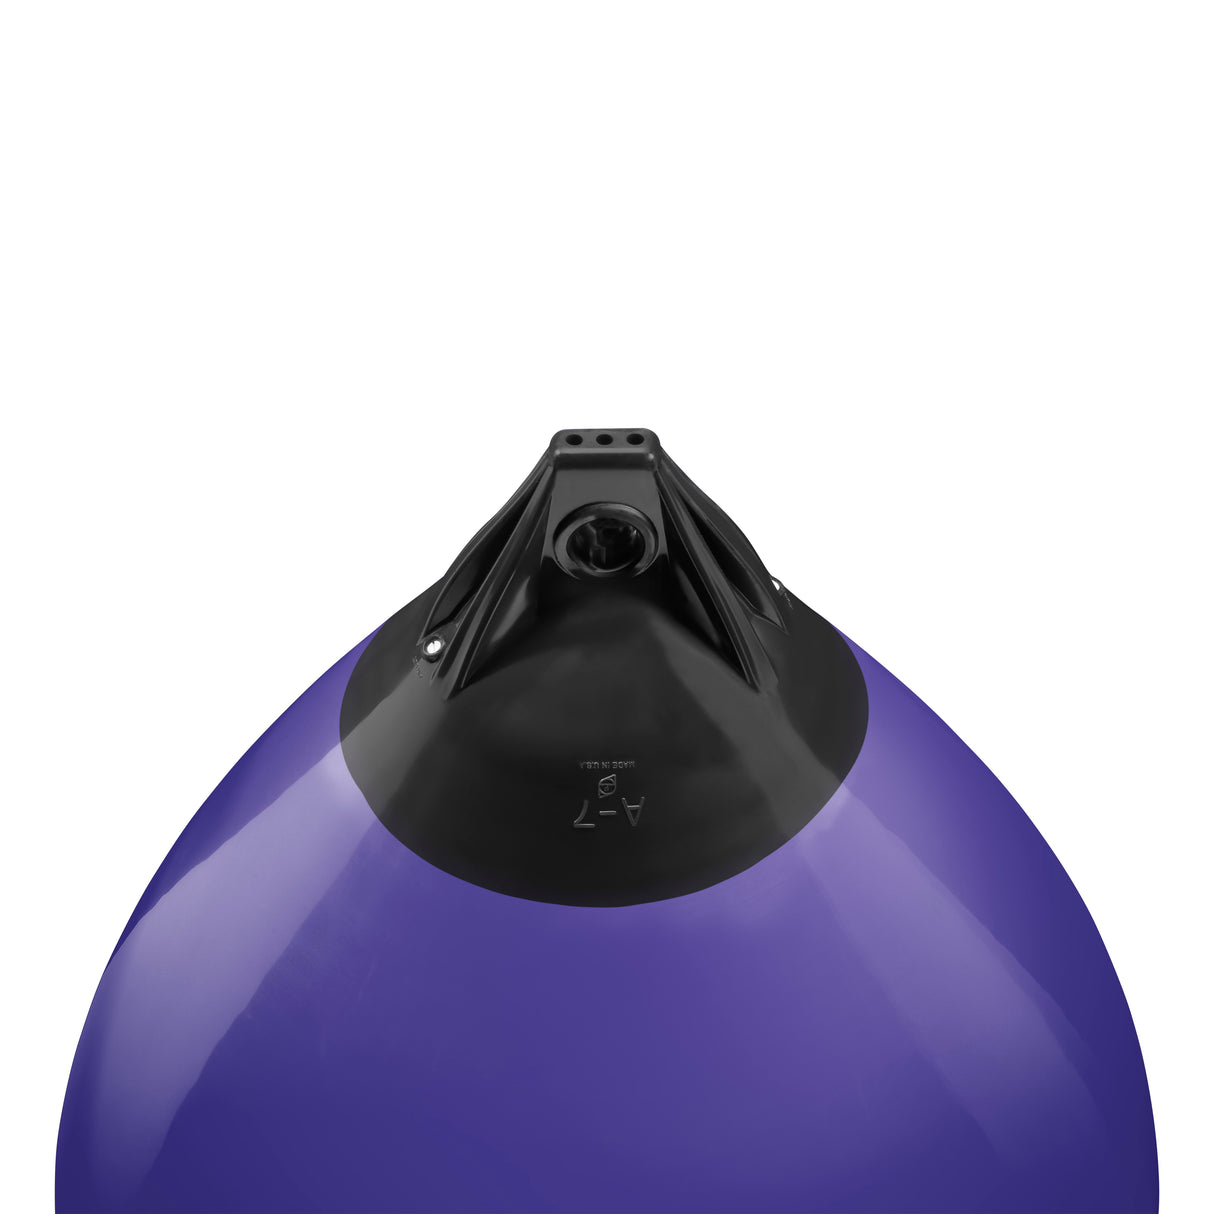 Purple buoy with Black-Top, Polyform A-7 angled shot